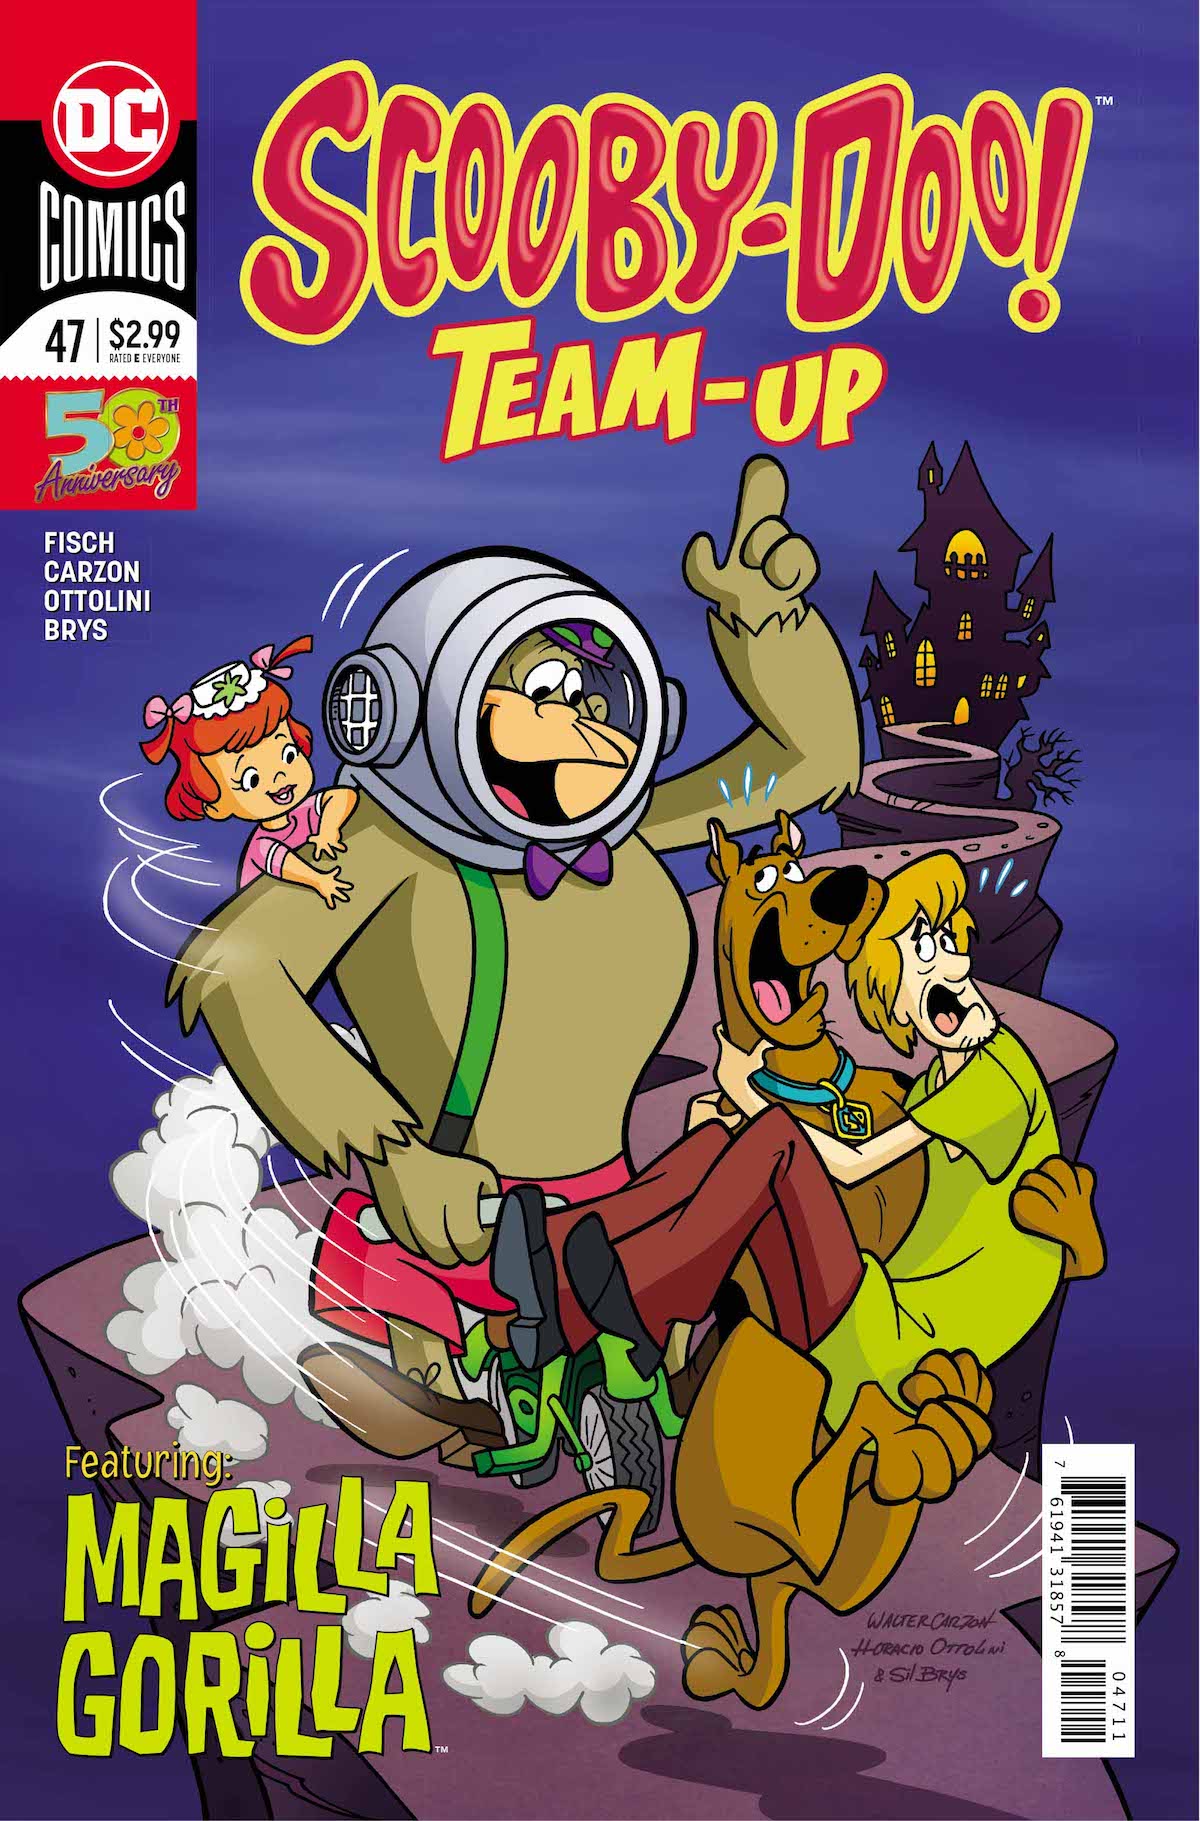 https://static.wikia.nocookie.net/scoobydoo/images/5/54/TU_47_cover.jpg/revision/latest?cb=20190324105234